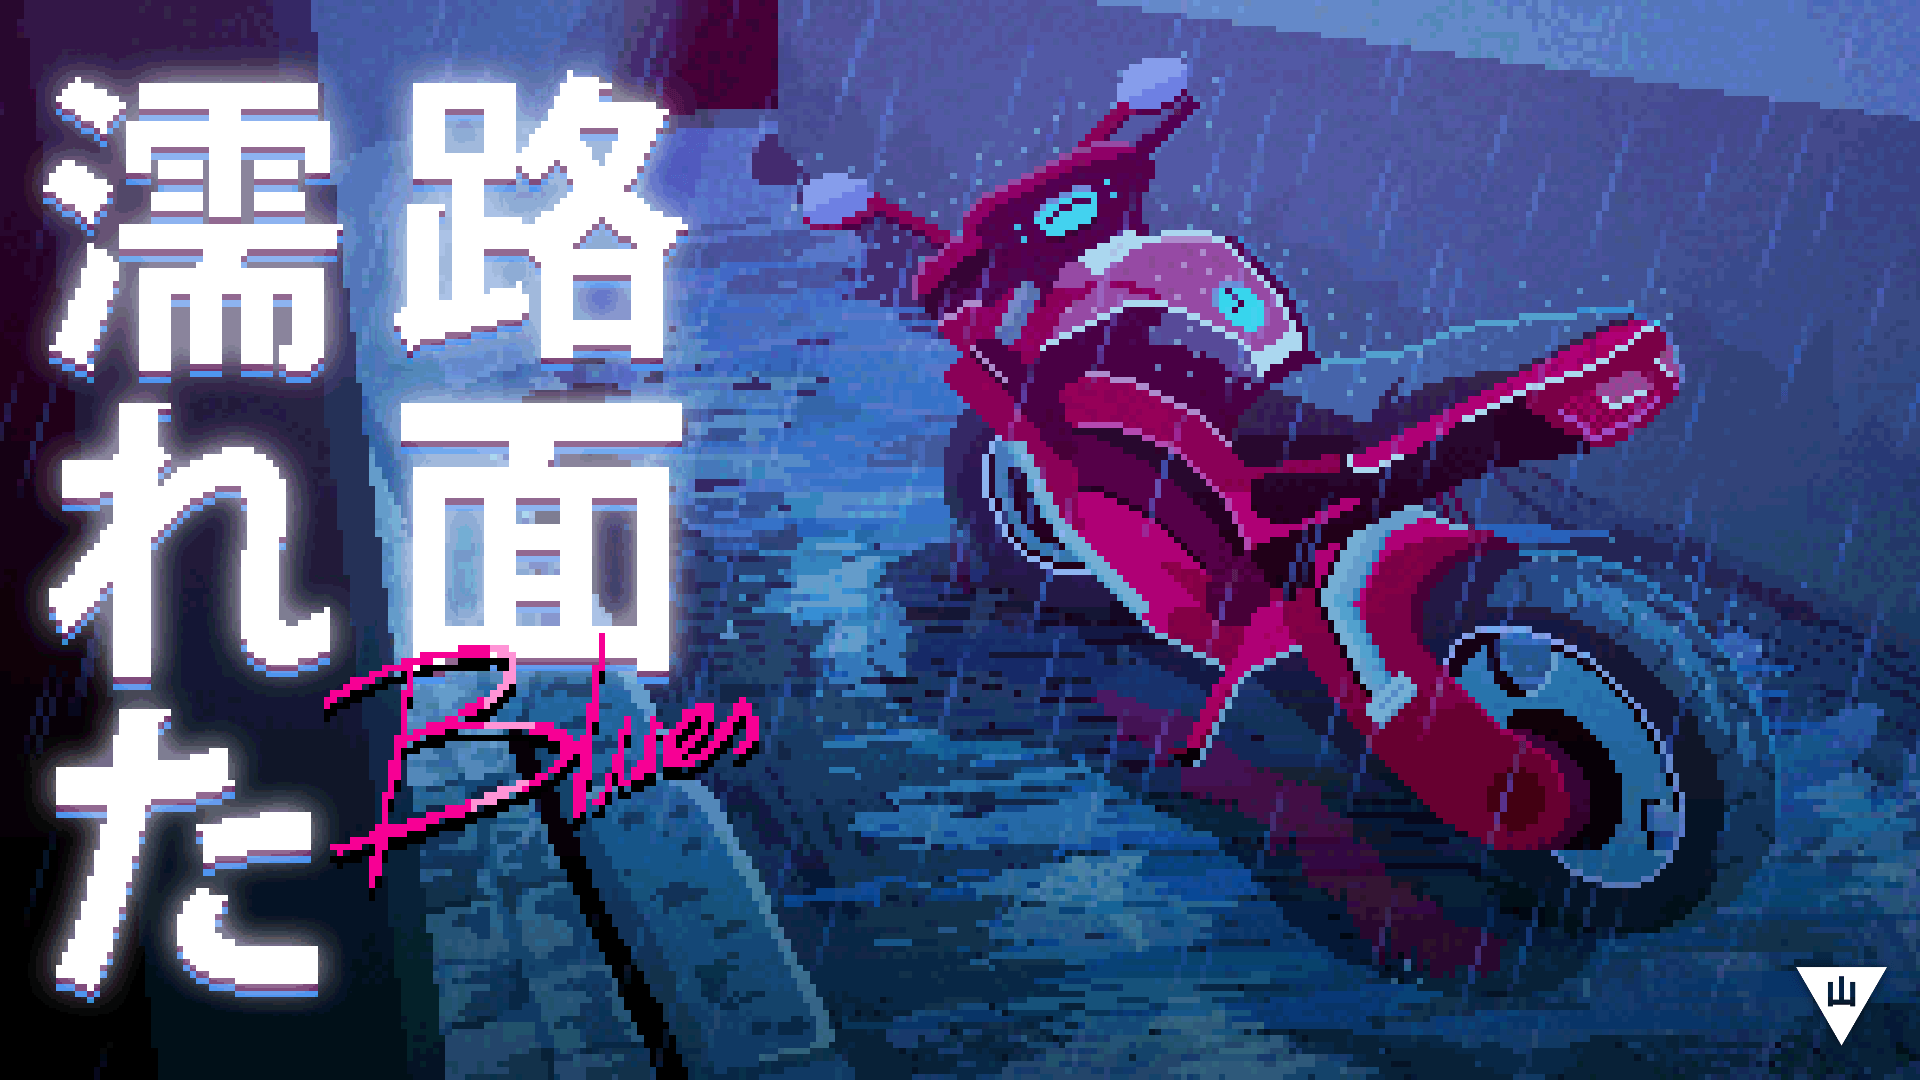 Some Of The Best New Retrowave Synthwave Wallpaper And Artwork